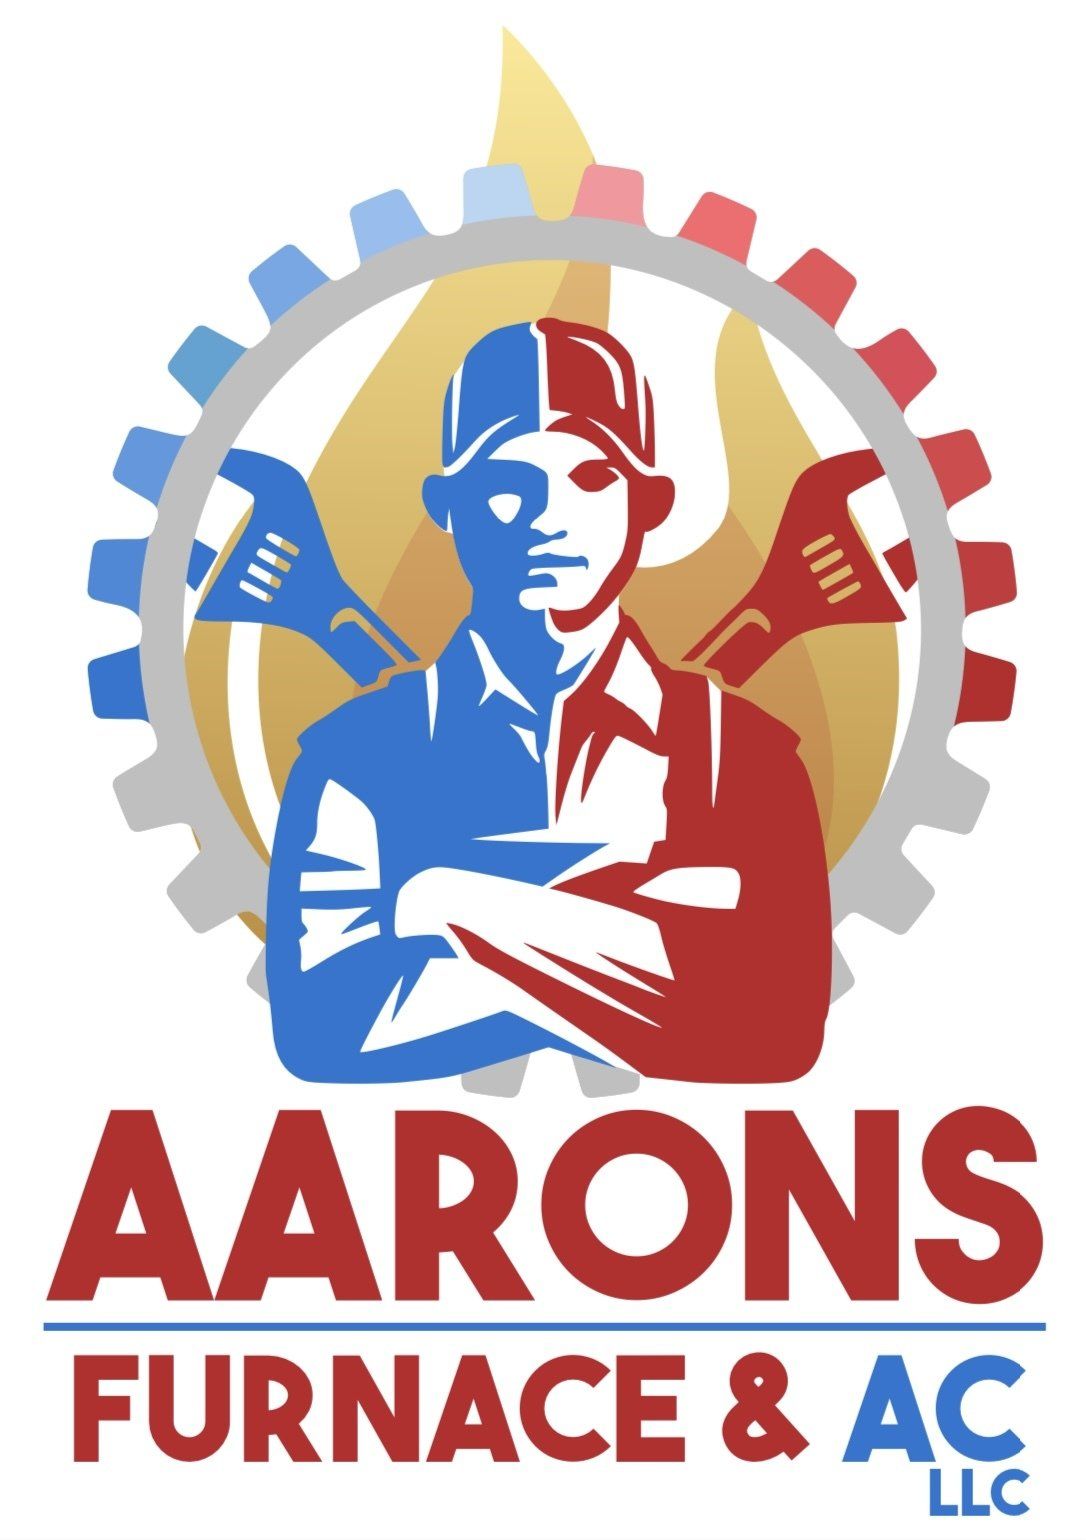 Aaron's Furnace & Air Conditioning - logo